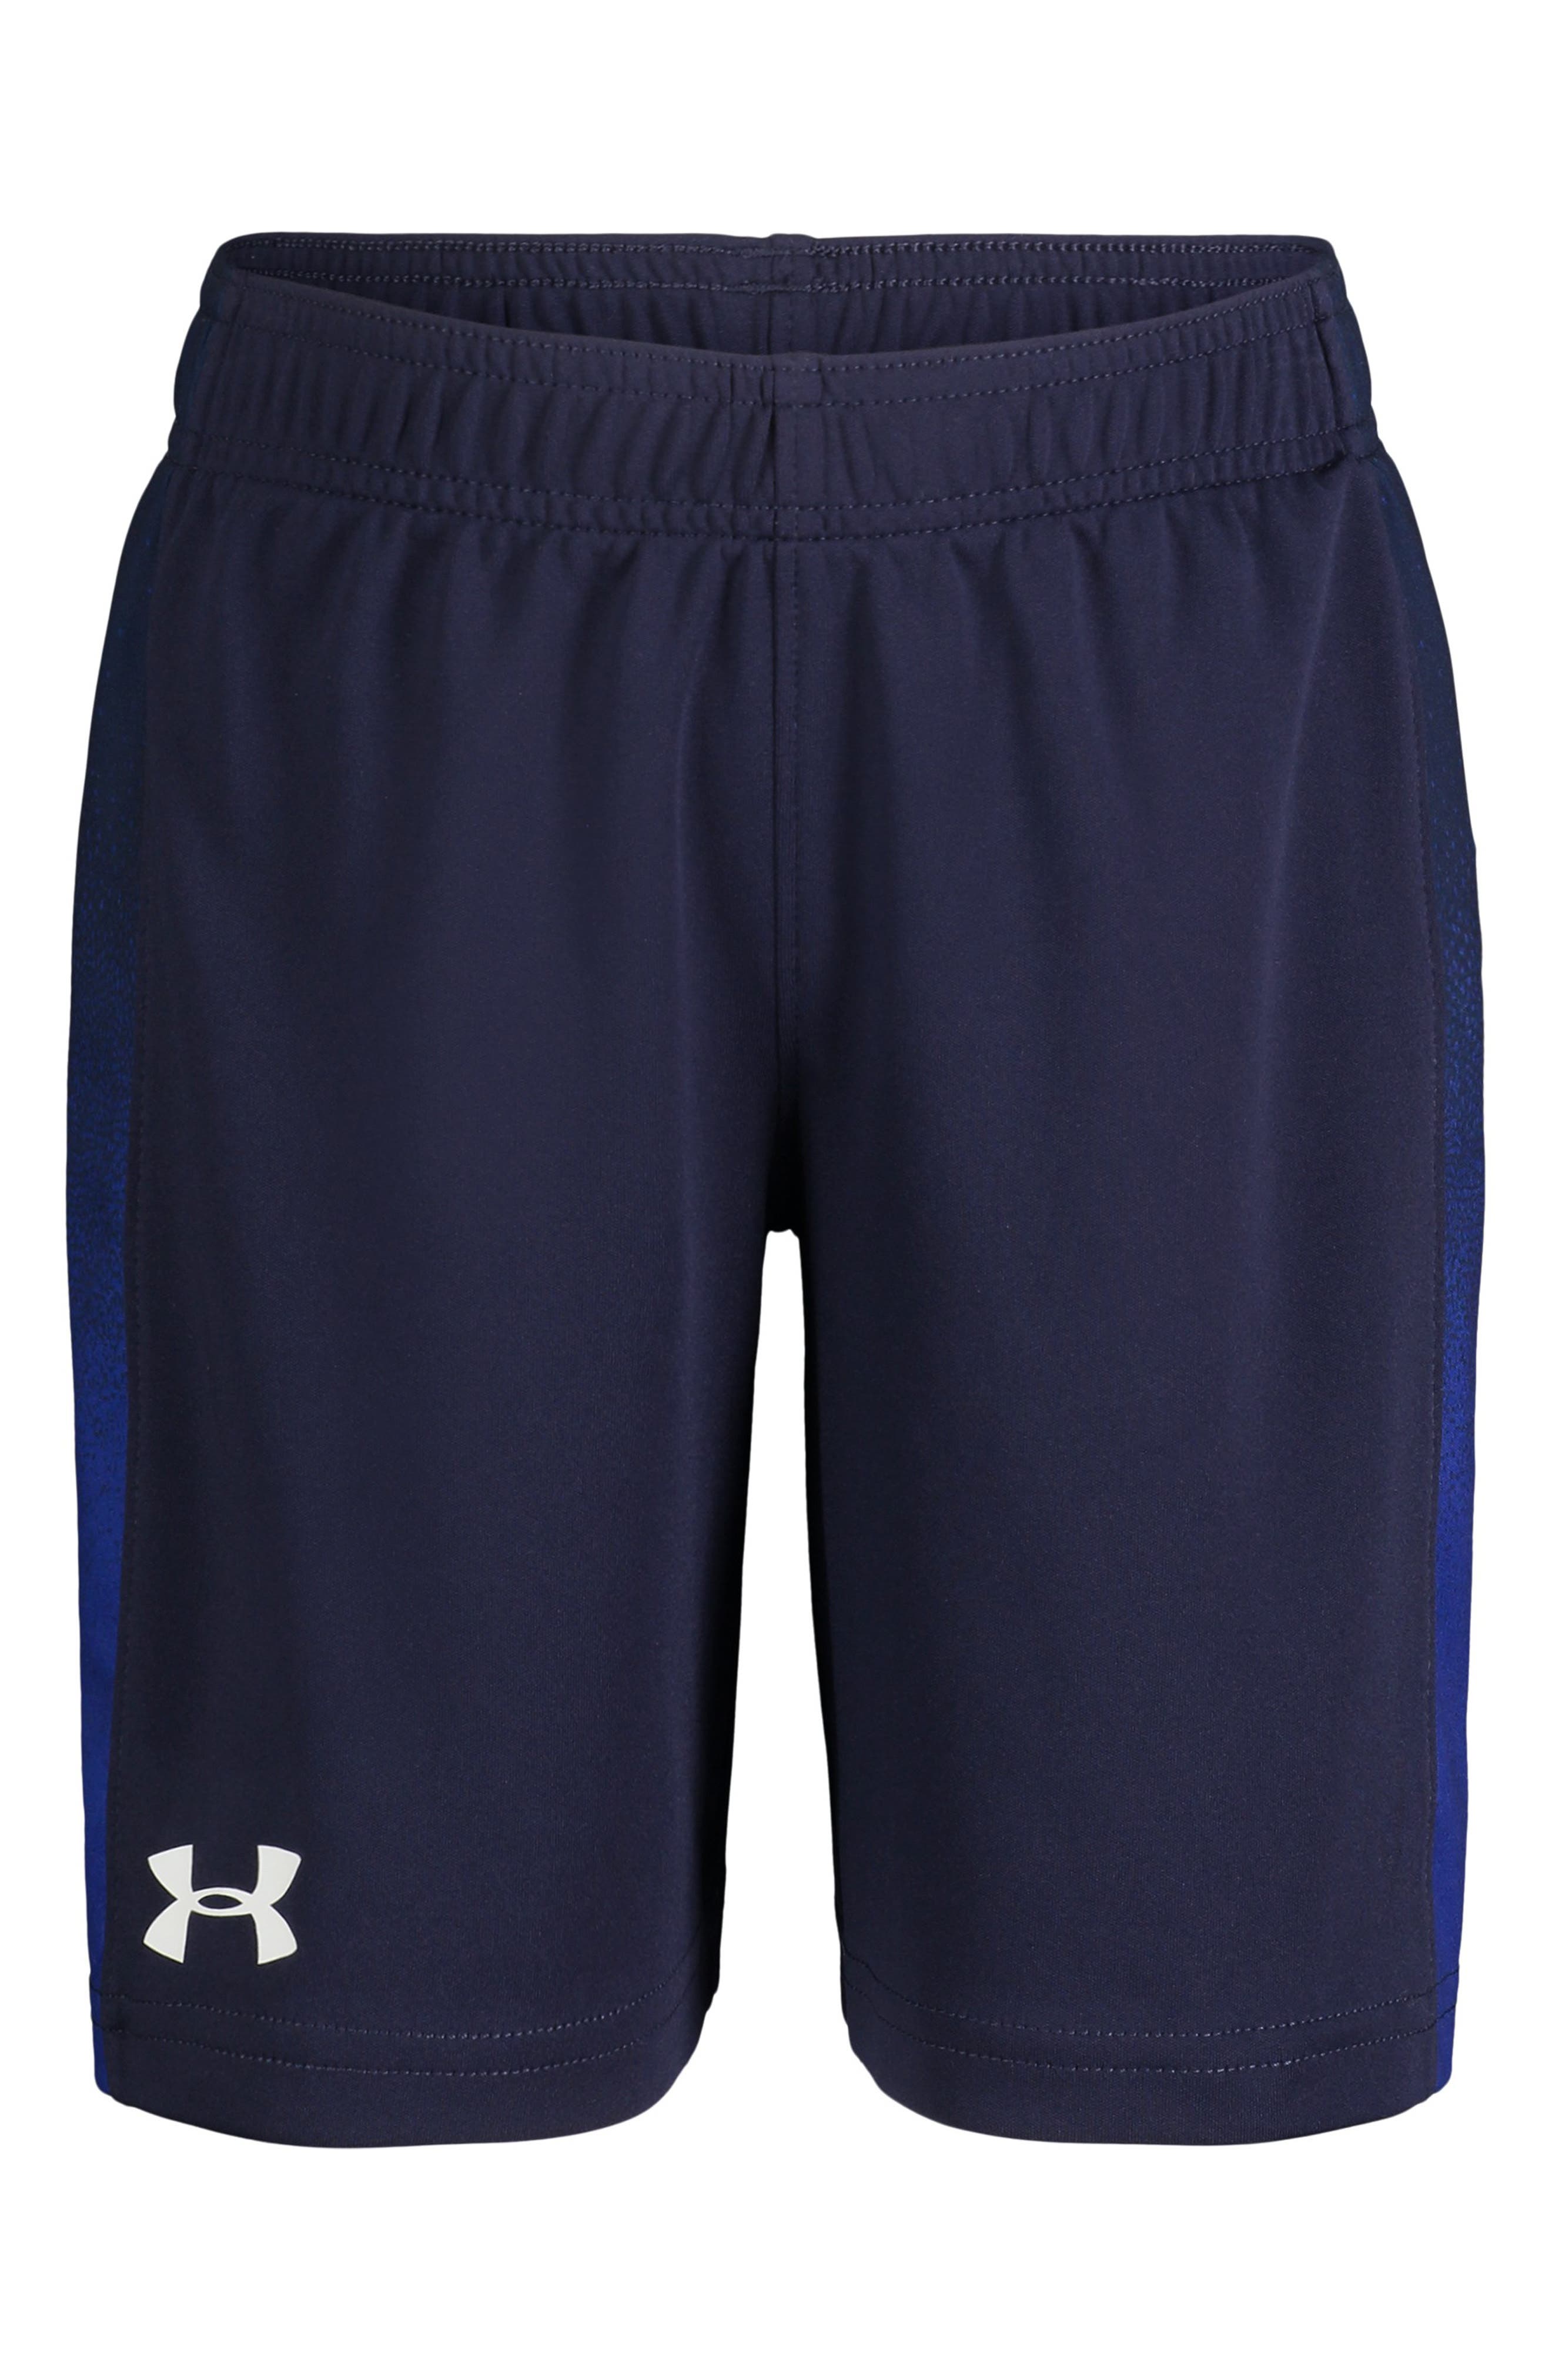 Under Armour Little Boys Fade Out Short 